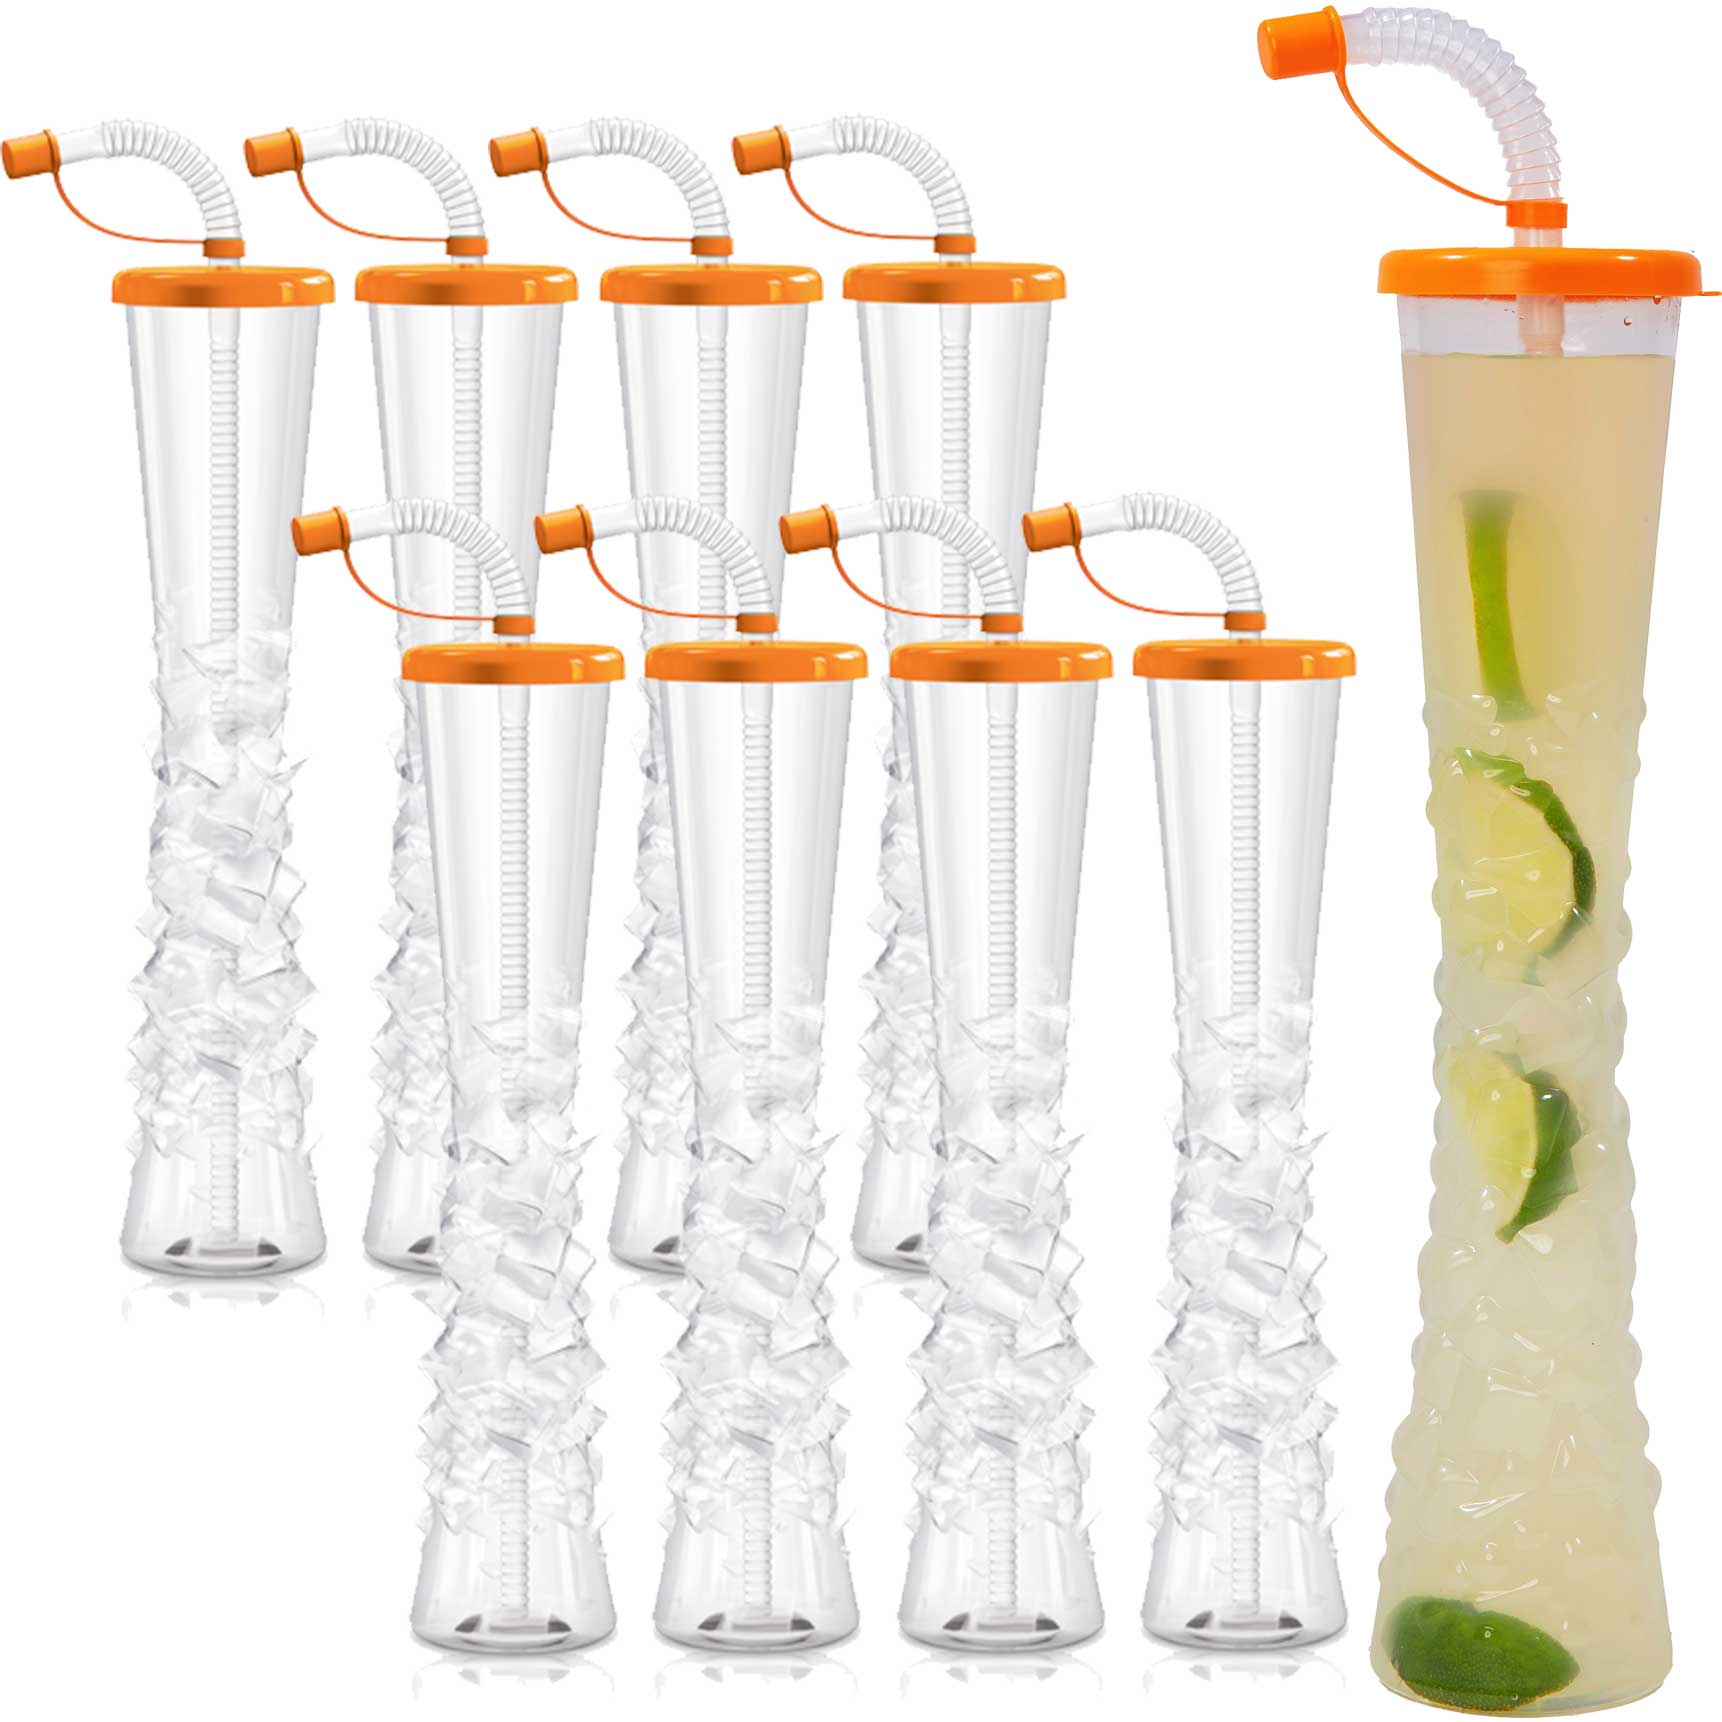 http://noveltycupsusa.com/cdn/shop/files/sweet-world-usa-yard-cups-ice-yard-cups-54-cups-orange-for-margaritas-and-frozen-drinks-kids-parties-17oz-500ml-sw-57354-cups-with-lids-and-straws-35524083515551.jpg?v=1684776226